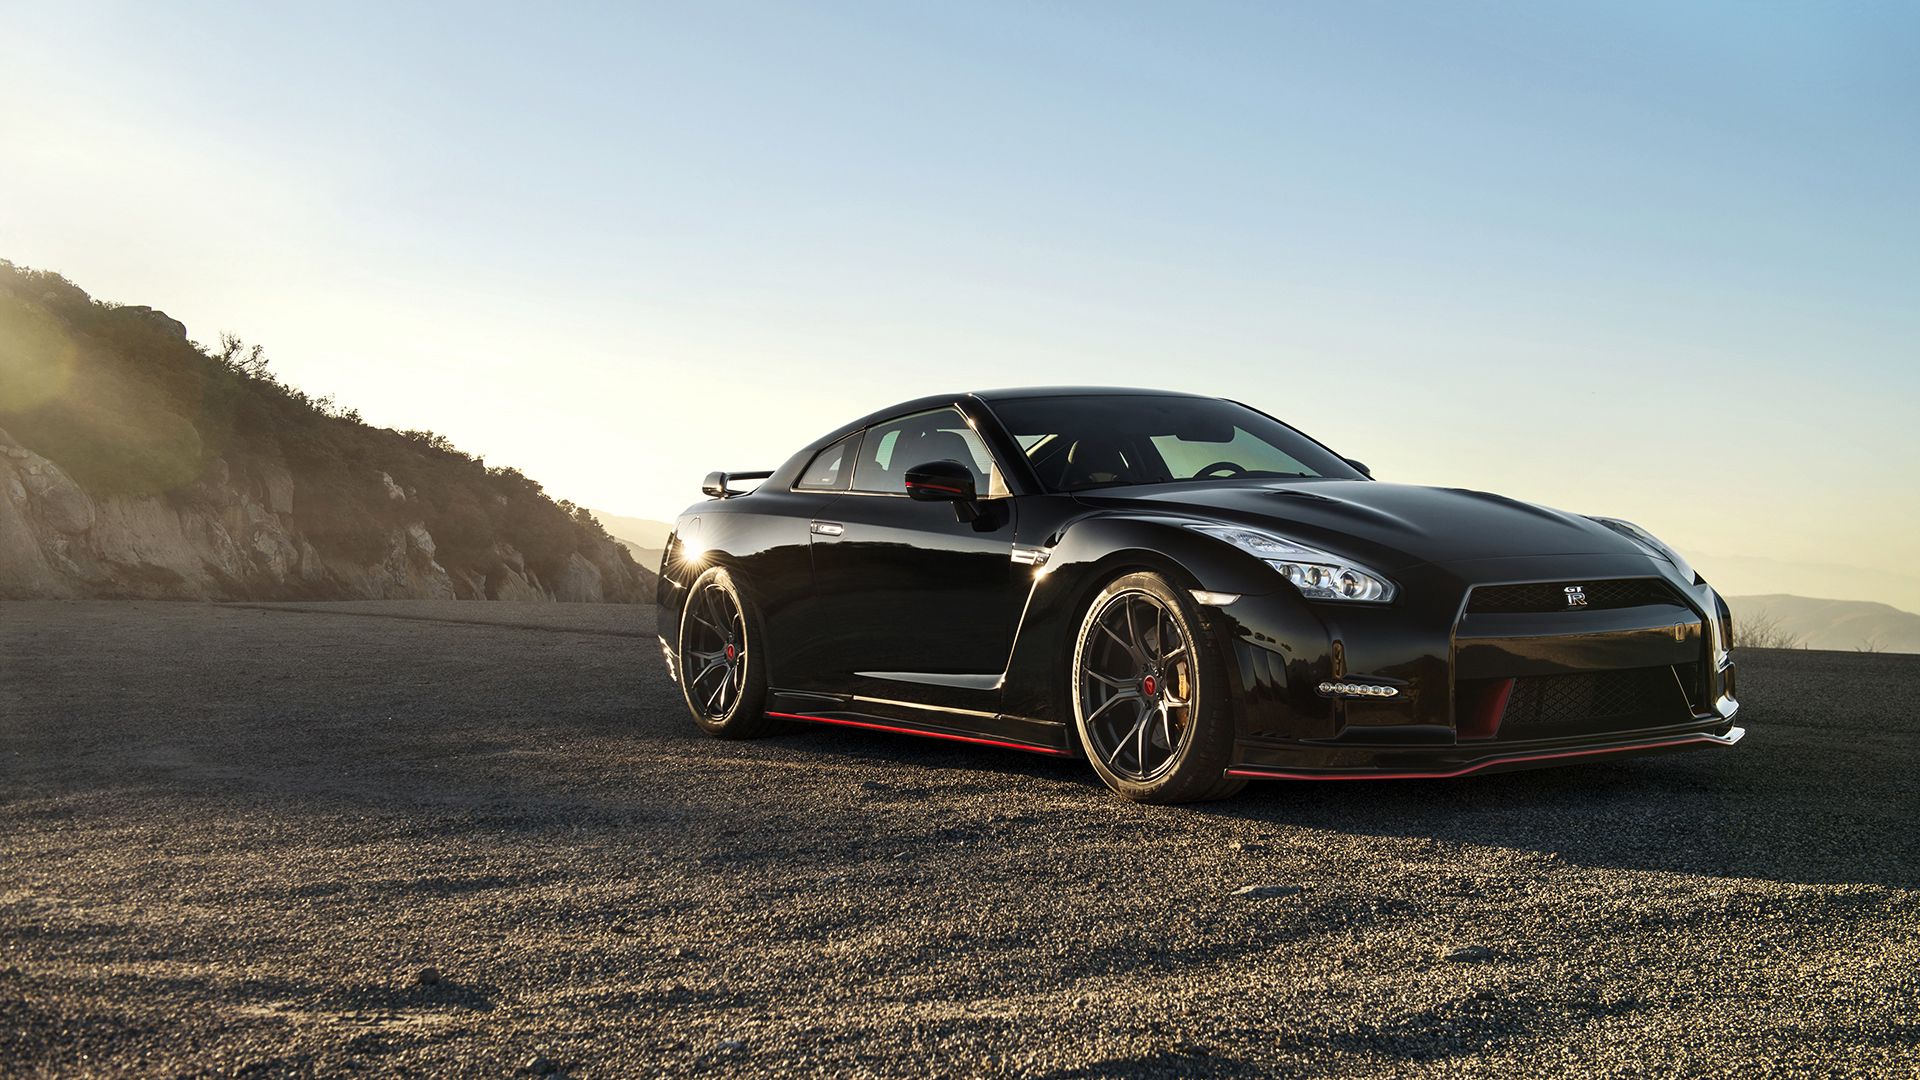 Download Wallpaper 1920x1080 Nissan, Gt R, Black, Side View Full Hd, Hdtv, Fhd, 1080p HD Background